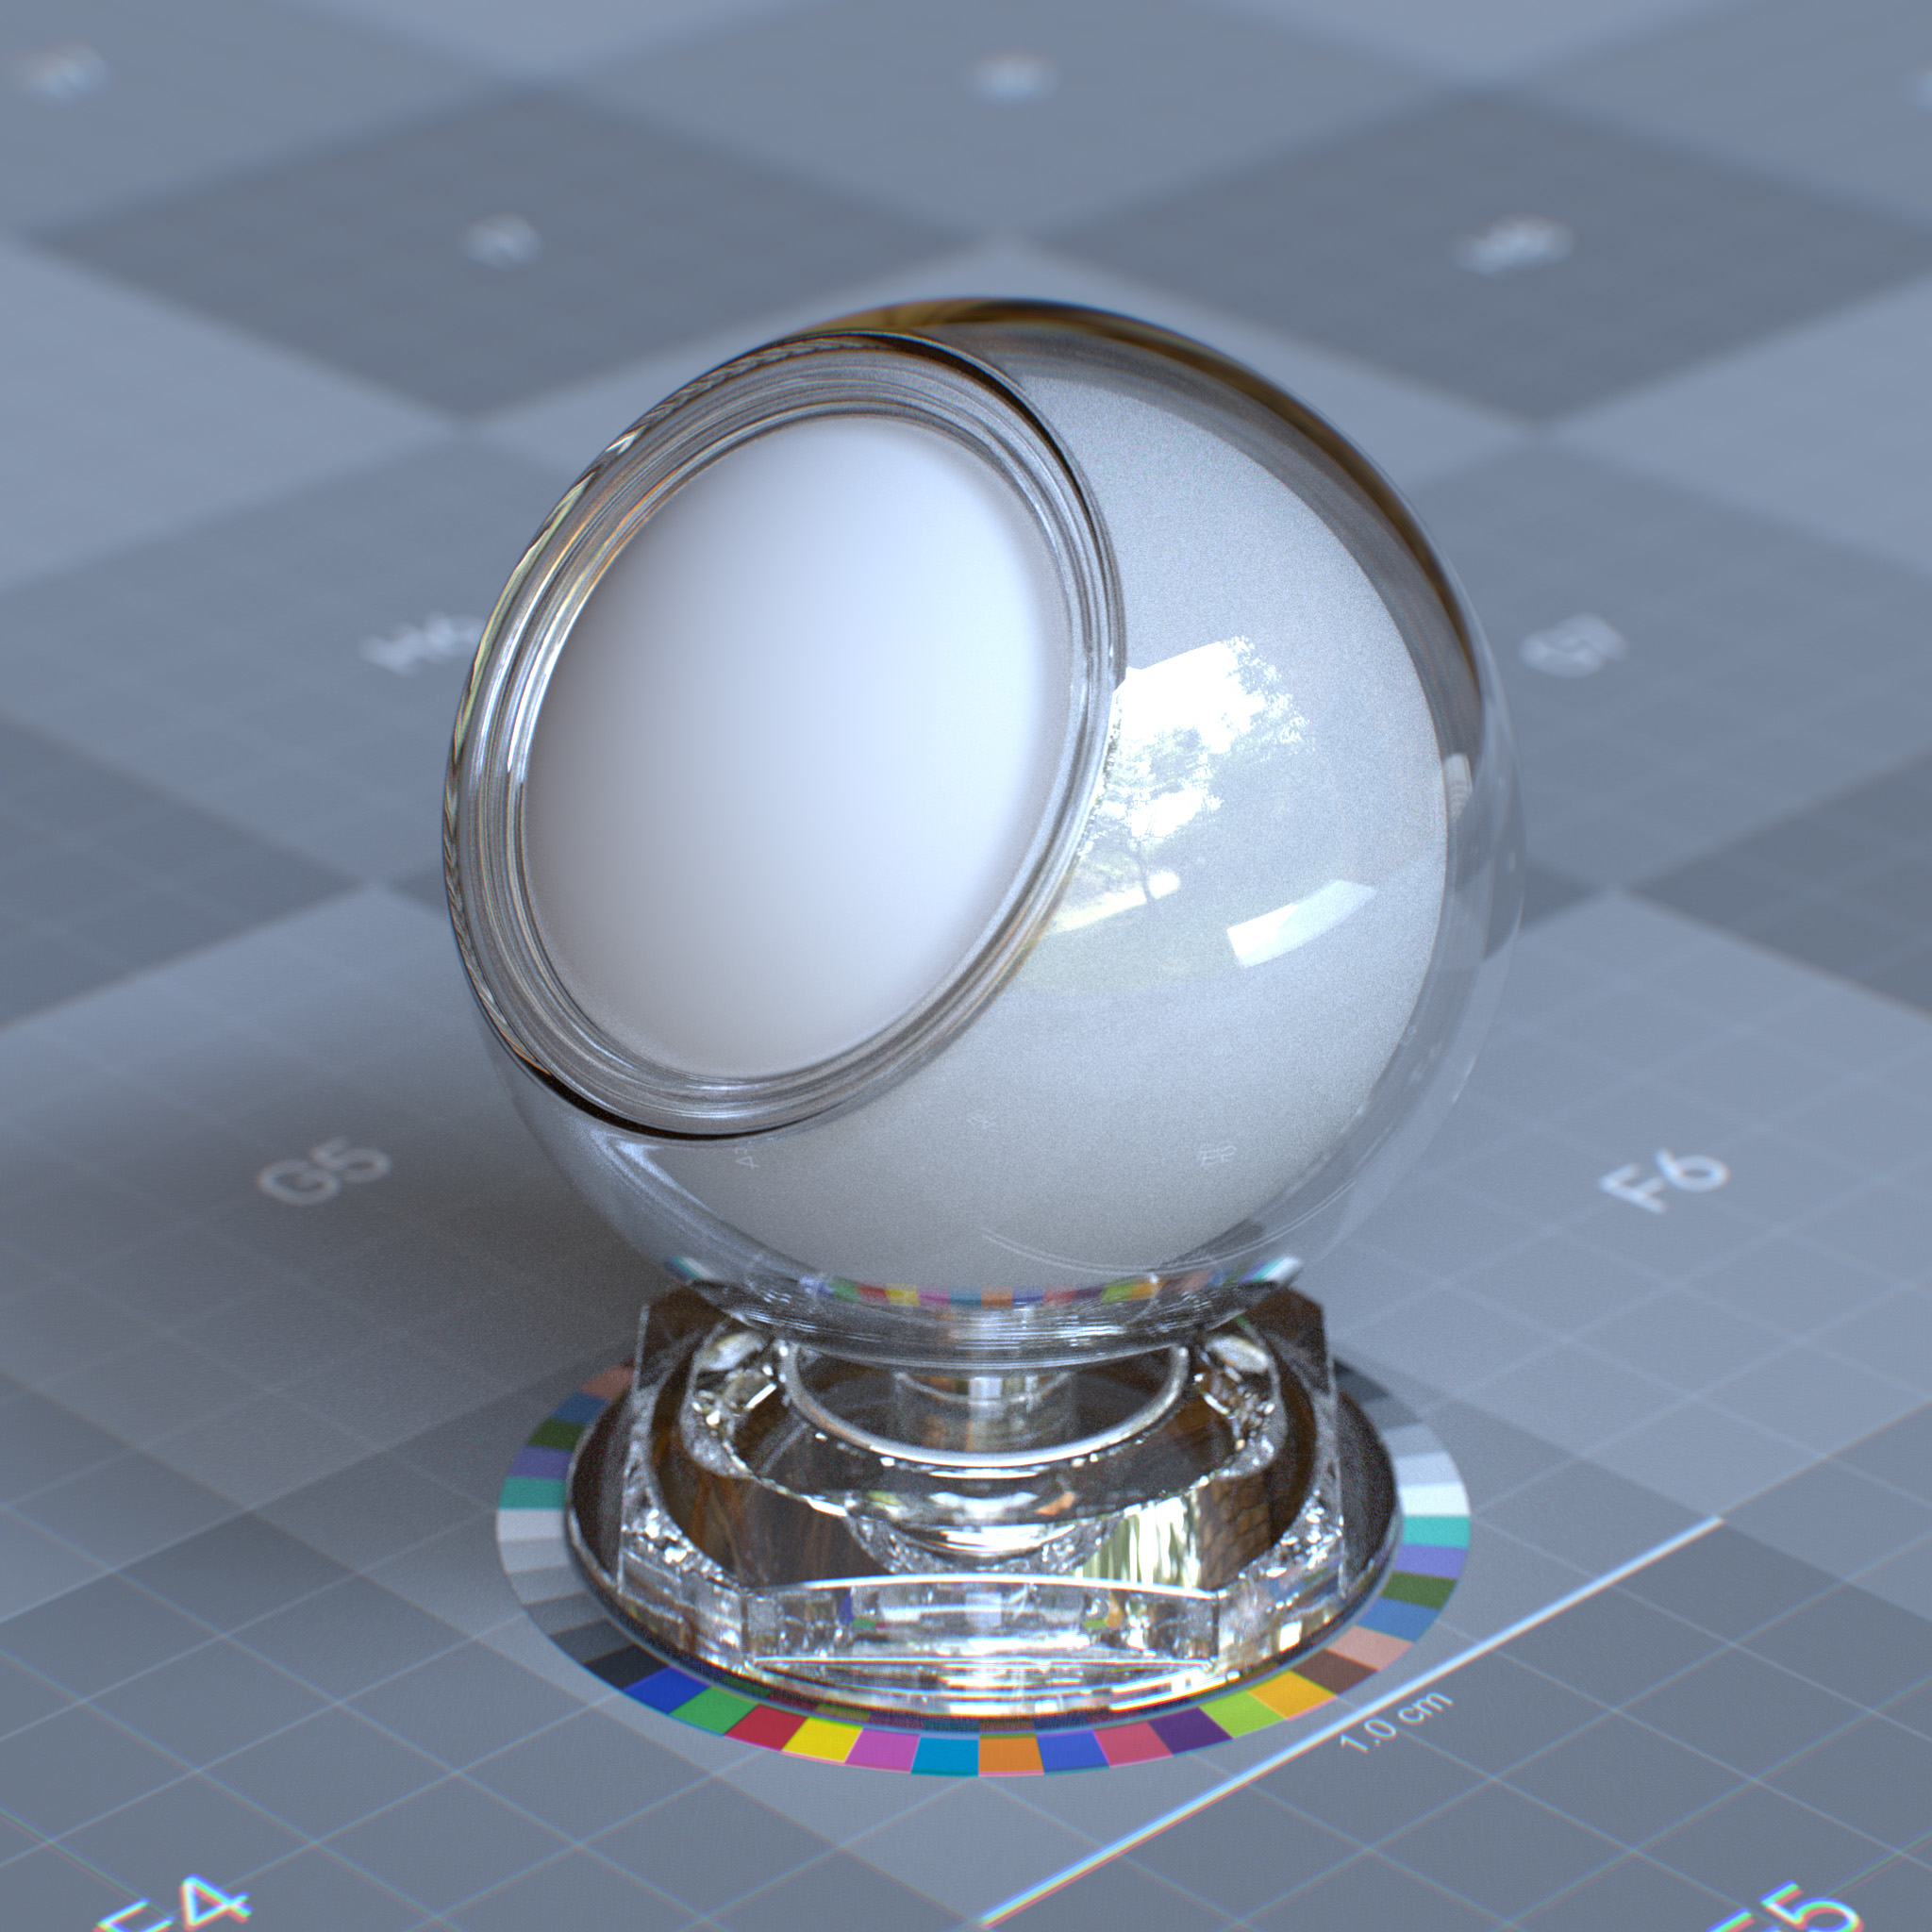 rtx_material_omnisurfacebase_specular_reflection_ior_2p5_refraction